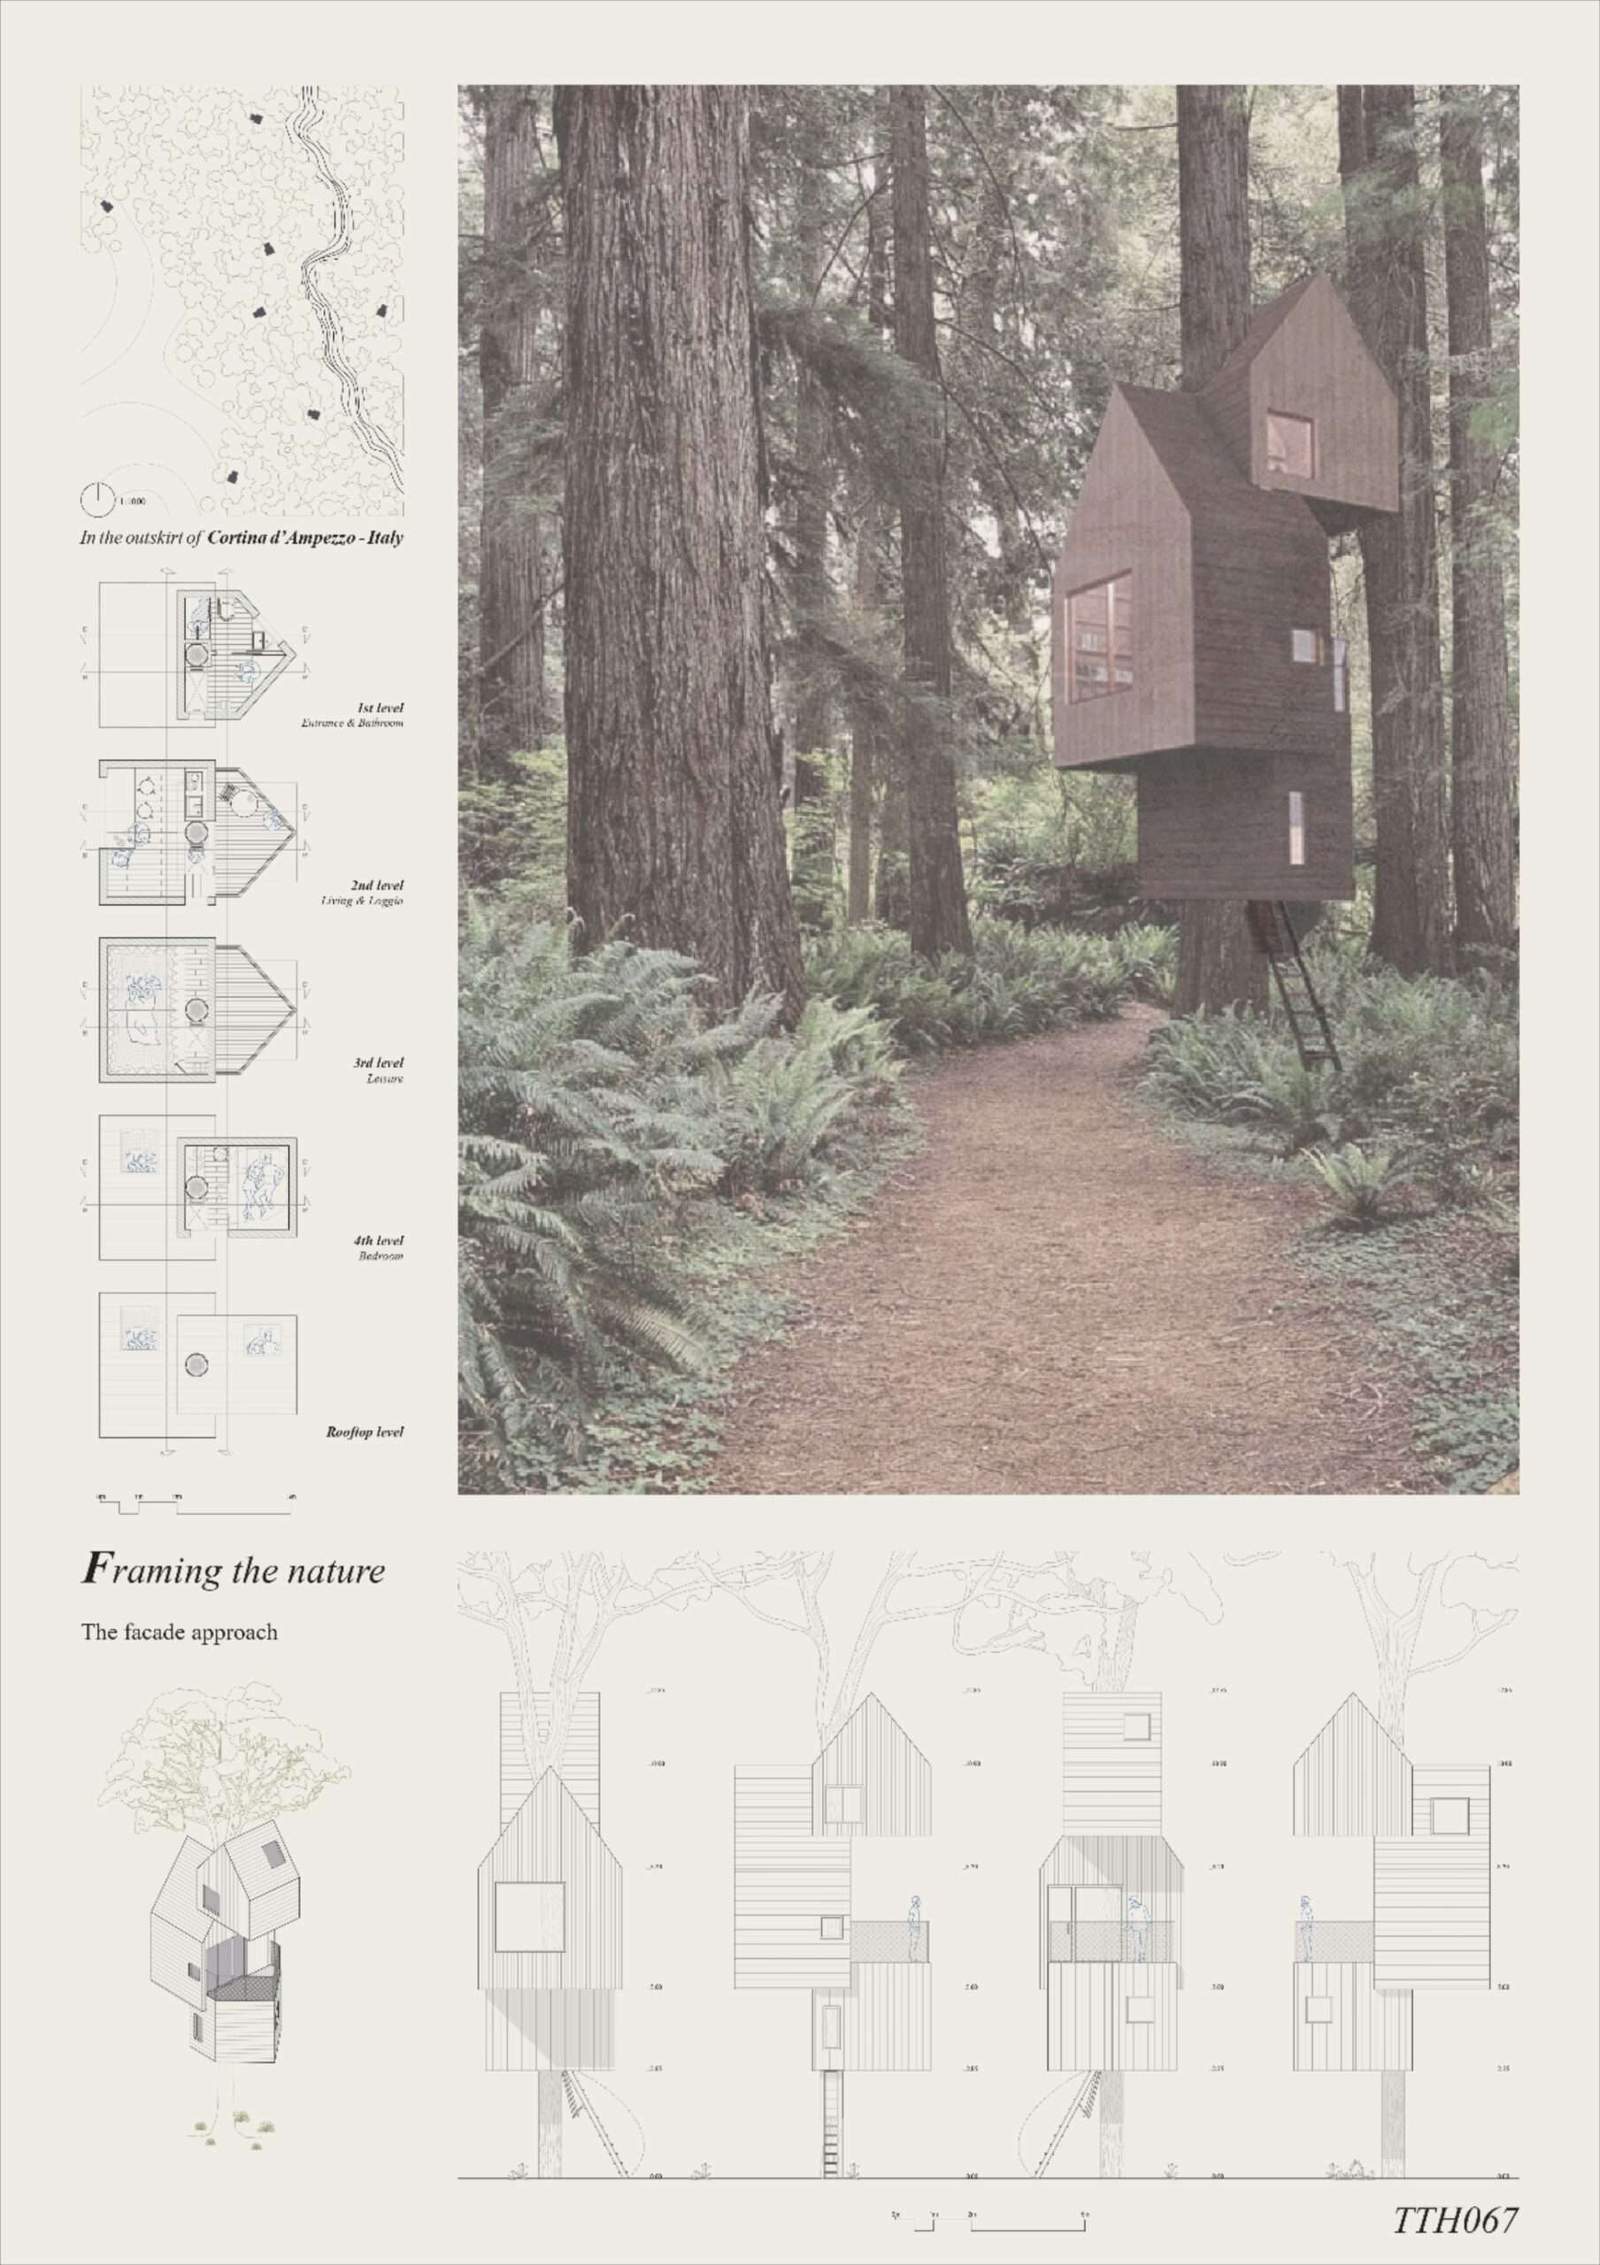 Results: The Tree House | Winning Architecture Boards | Architecture Panels